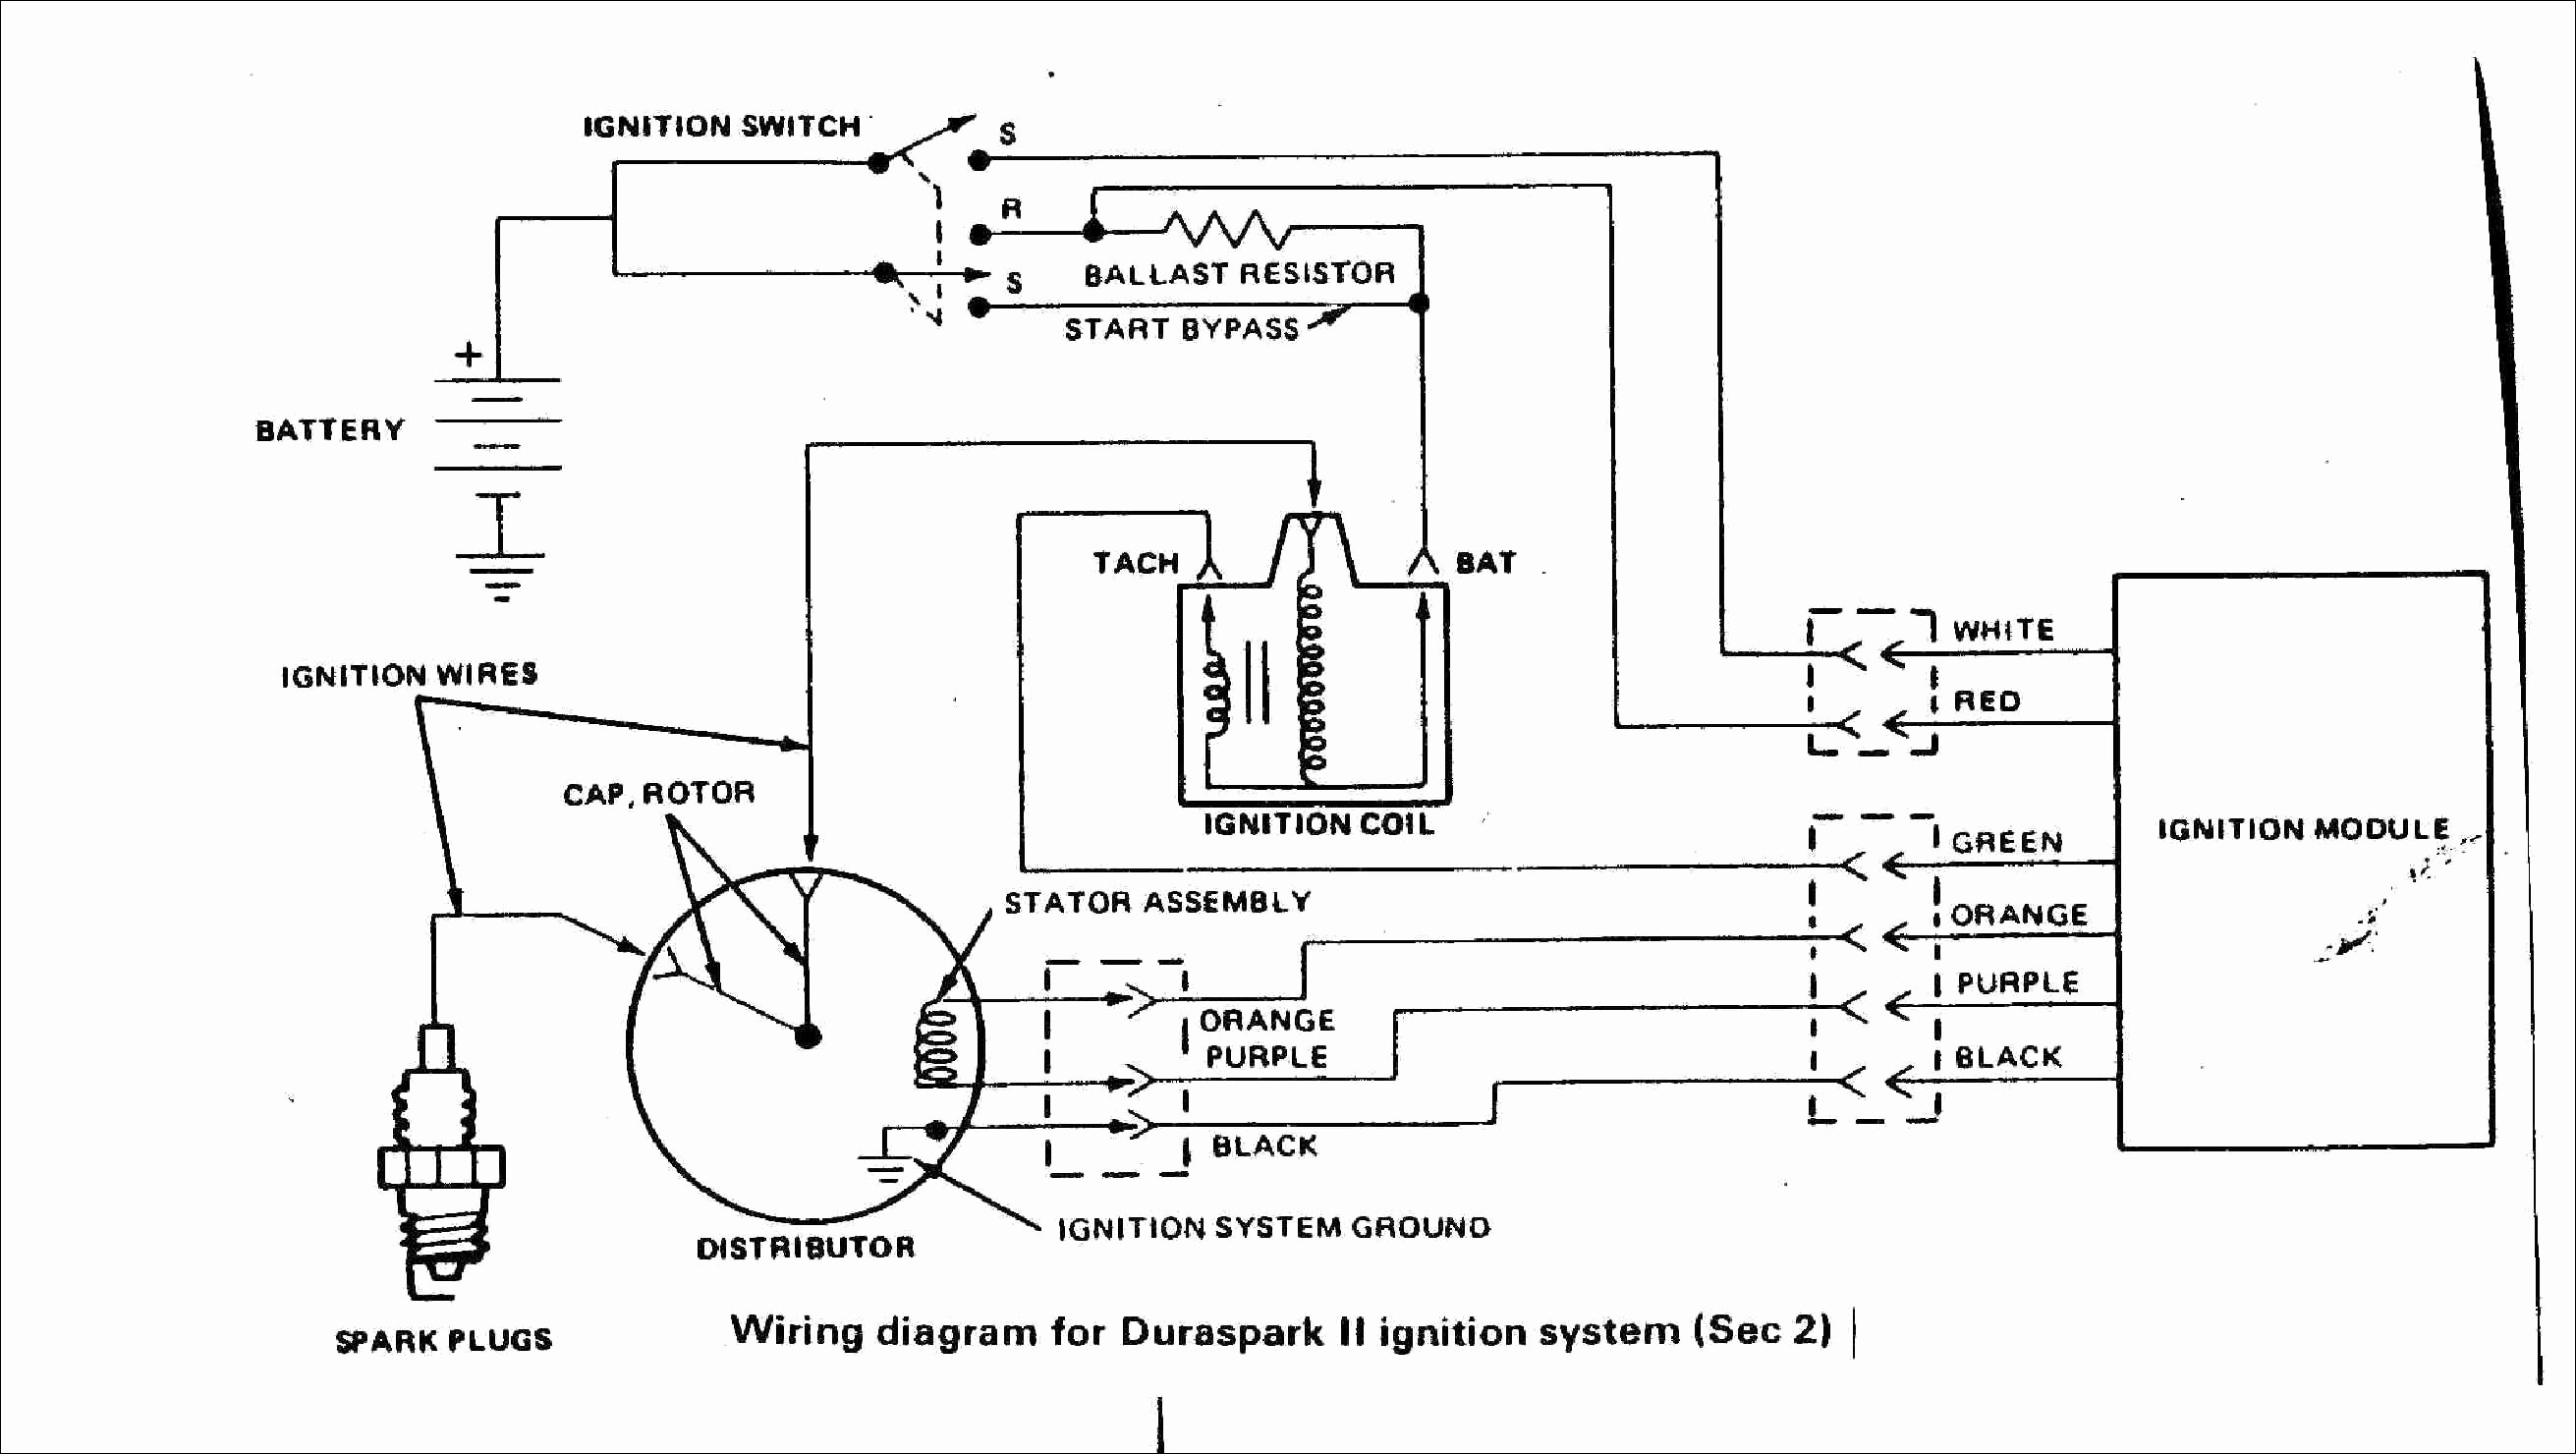 3 Position Ignition Switch Wiring Diagram New Lawn Mower Ignition Switch Wiring Diagram Unique Od Wiring